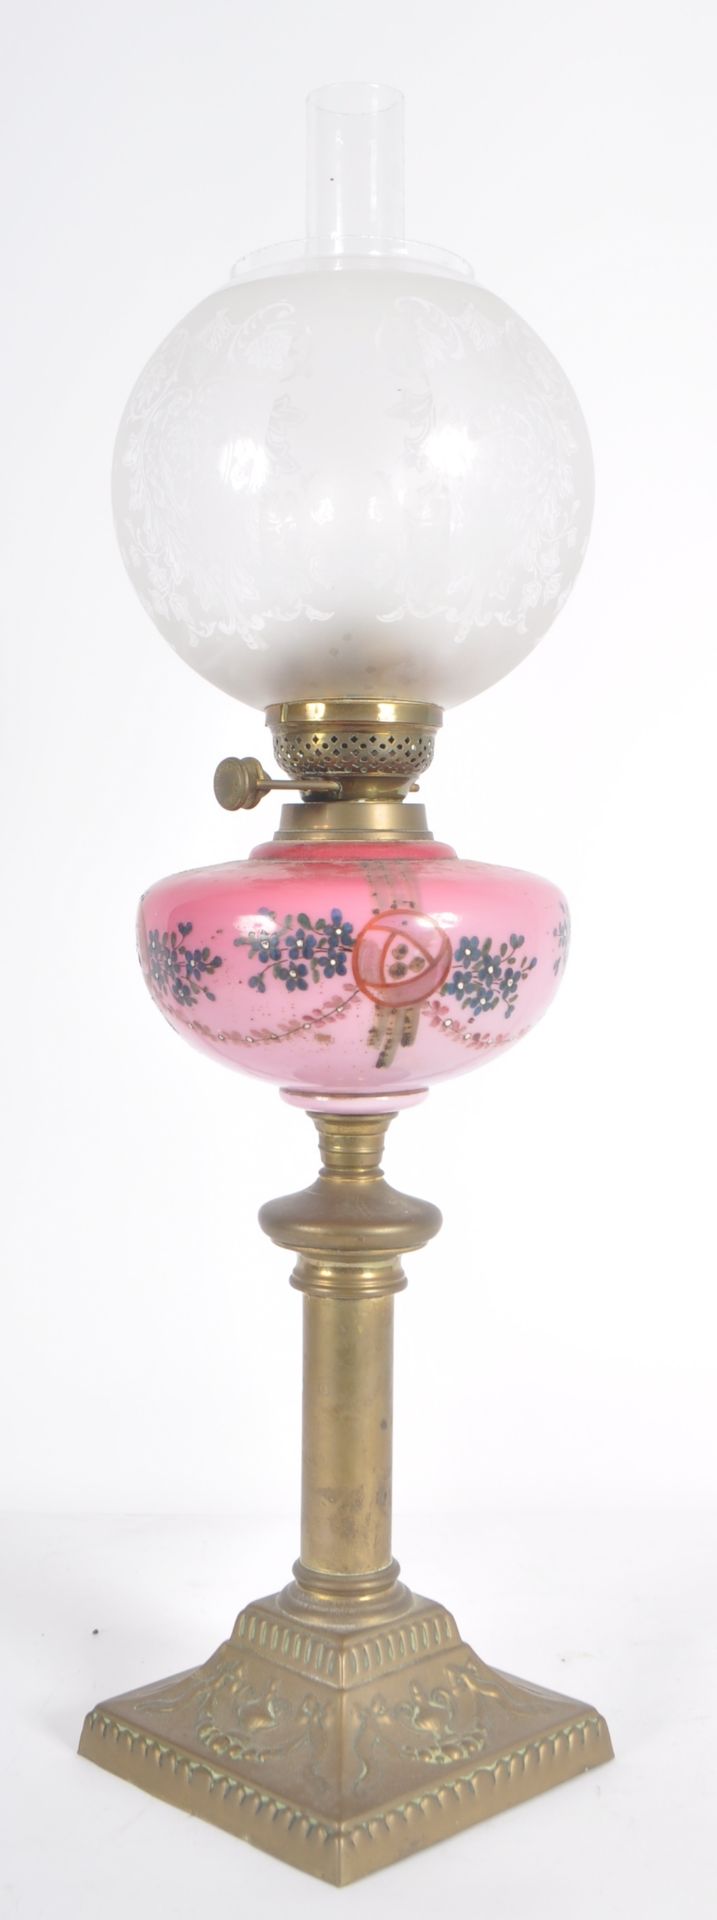 19TH CENTURY VICTORIAN NEOCLASSICAL OIL LAMP - Image 6 of 8